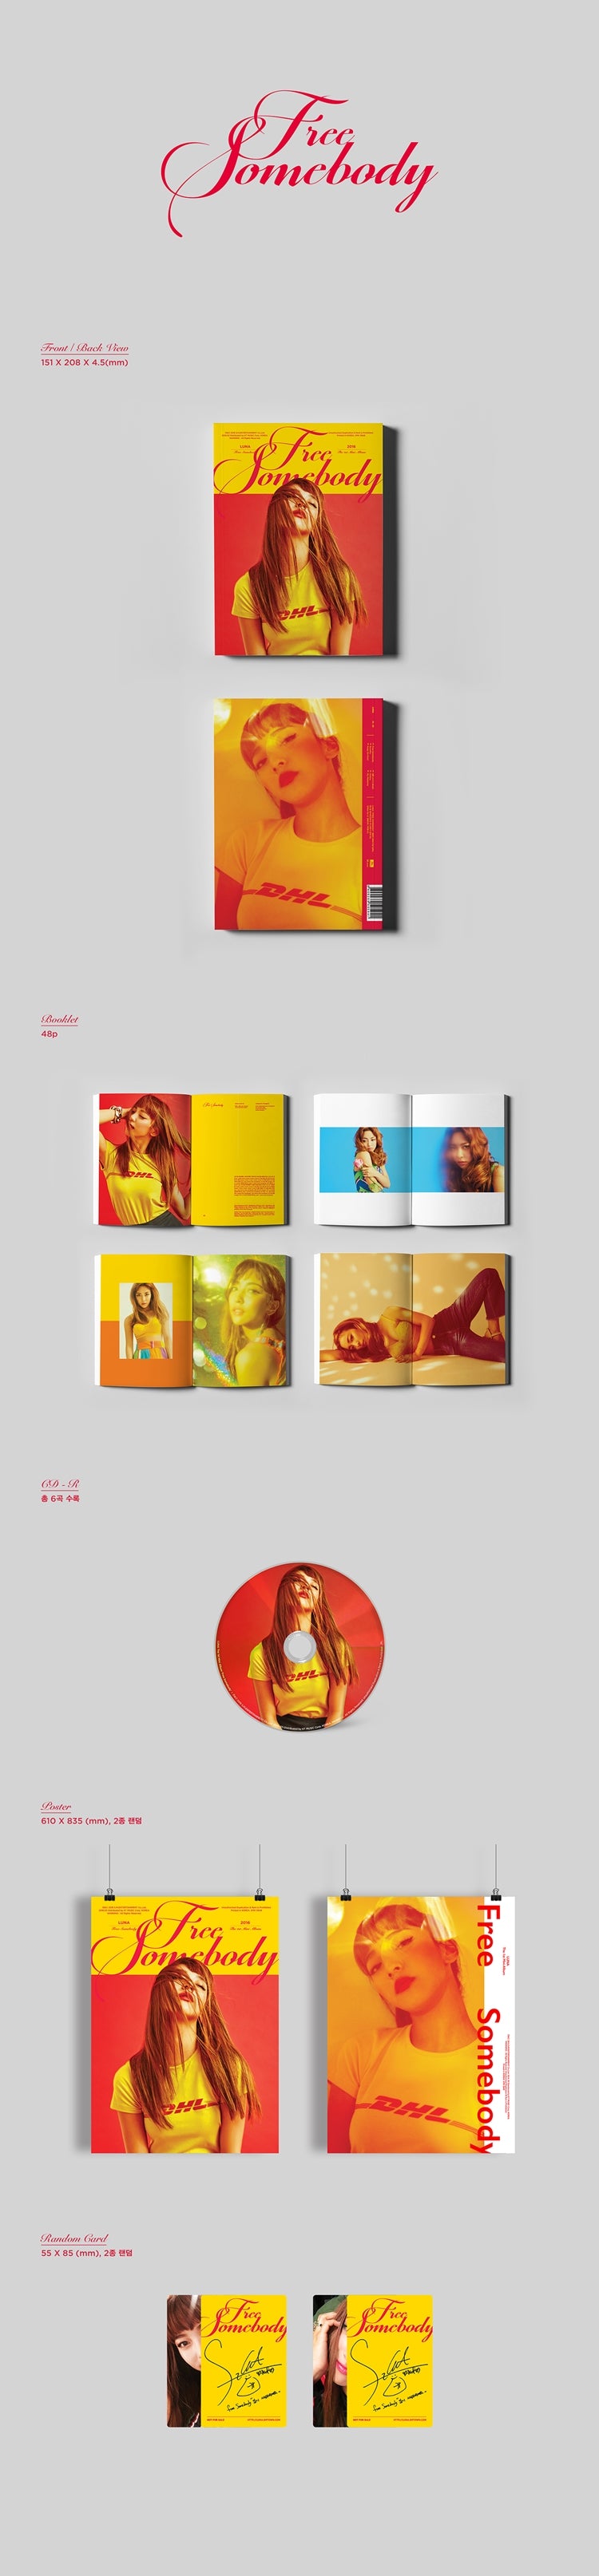 f(x) Luna's solo debut! First mini-album 'Free Somebody' released on May 31st! f(x) Luna transforms into a solo singer. Lu...